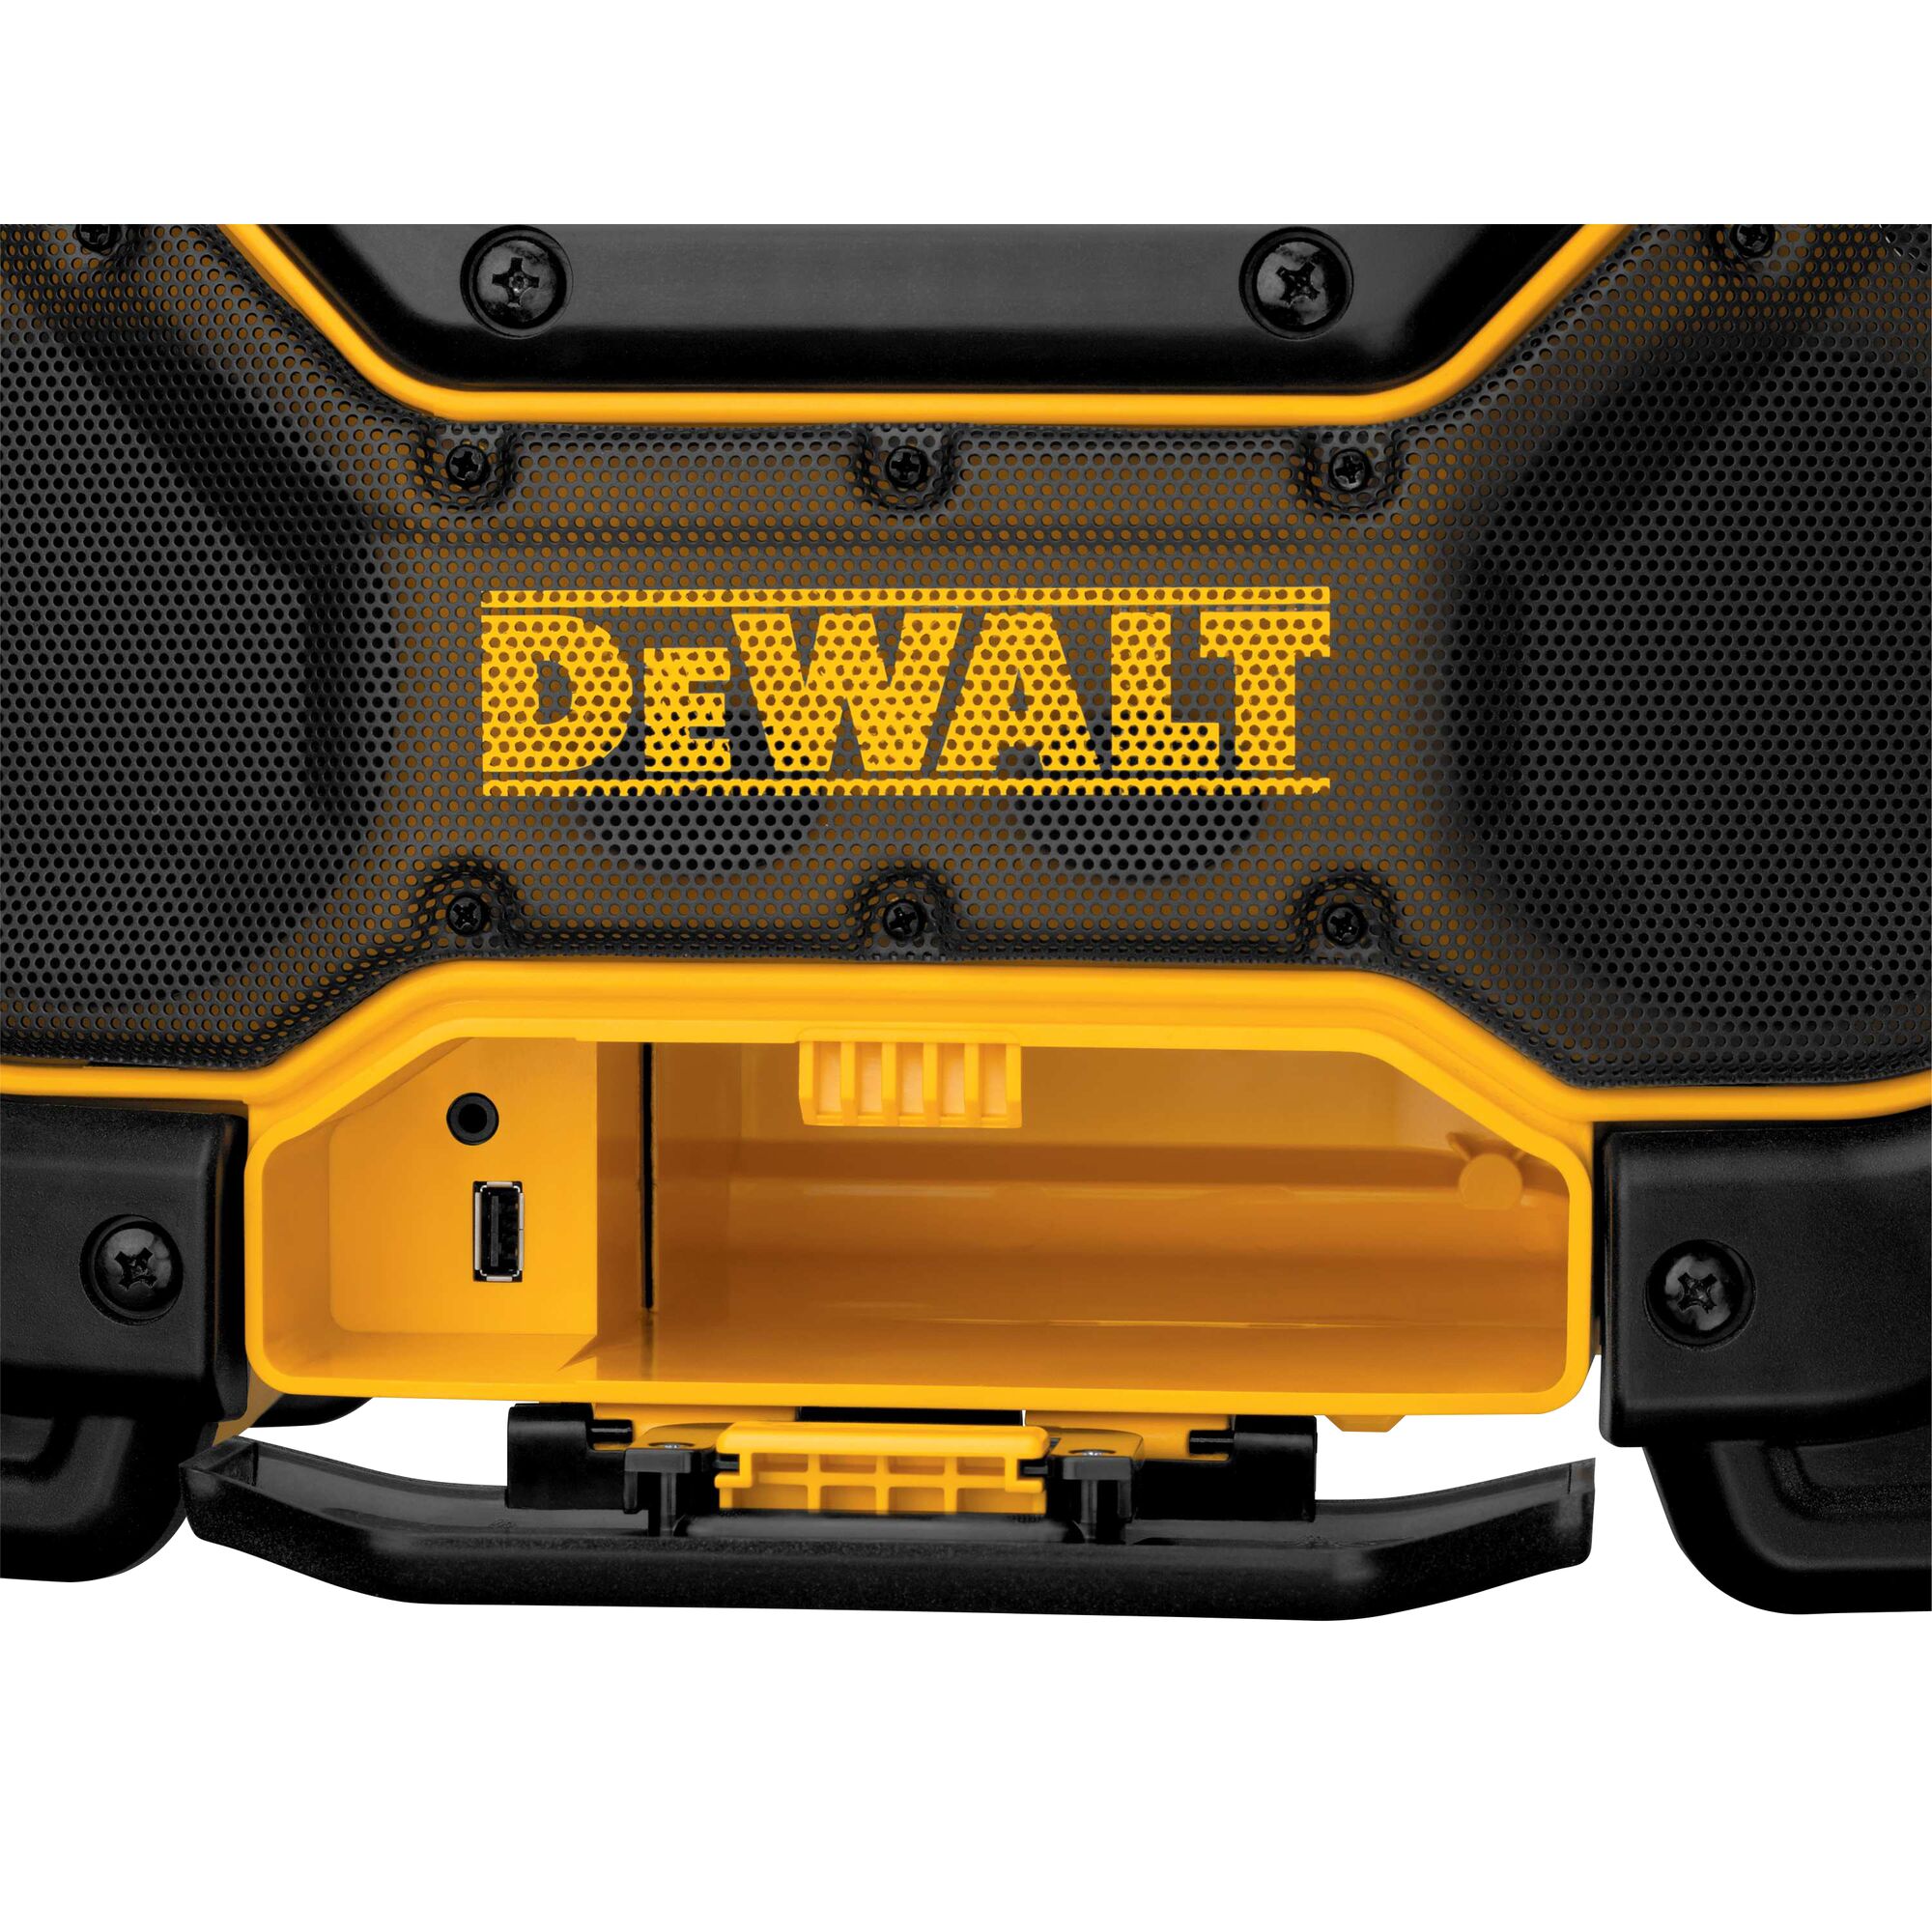 DEWALT DCR025 tooth Radio Charger, Blue with Compact XR Li-Ion Battery Pack - 4